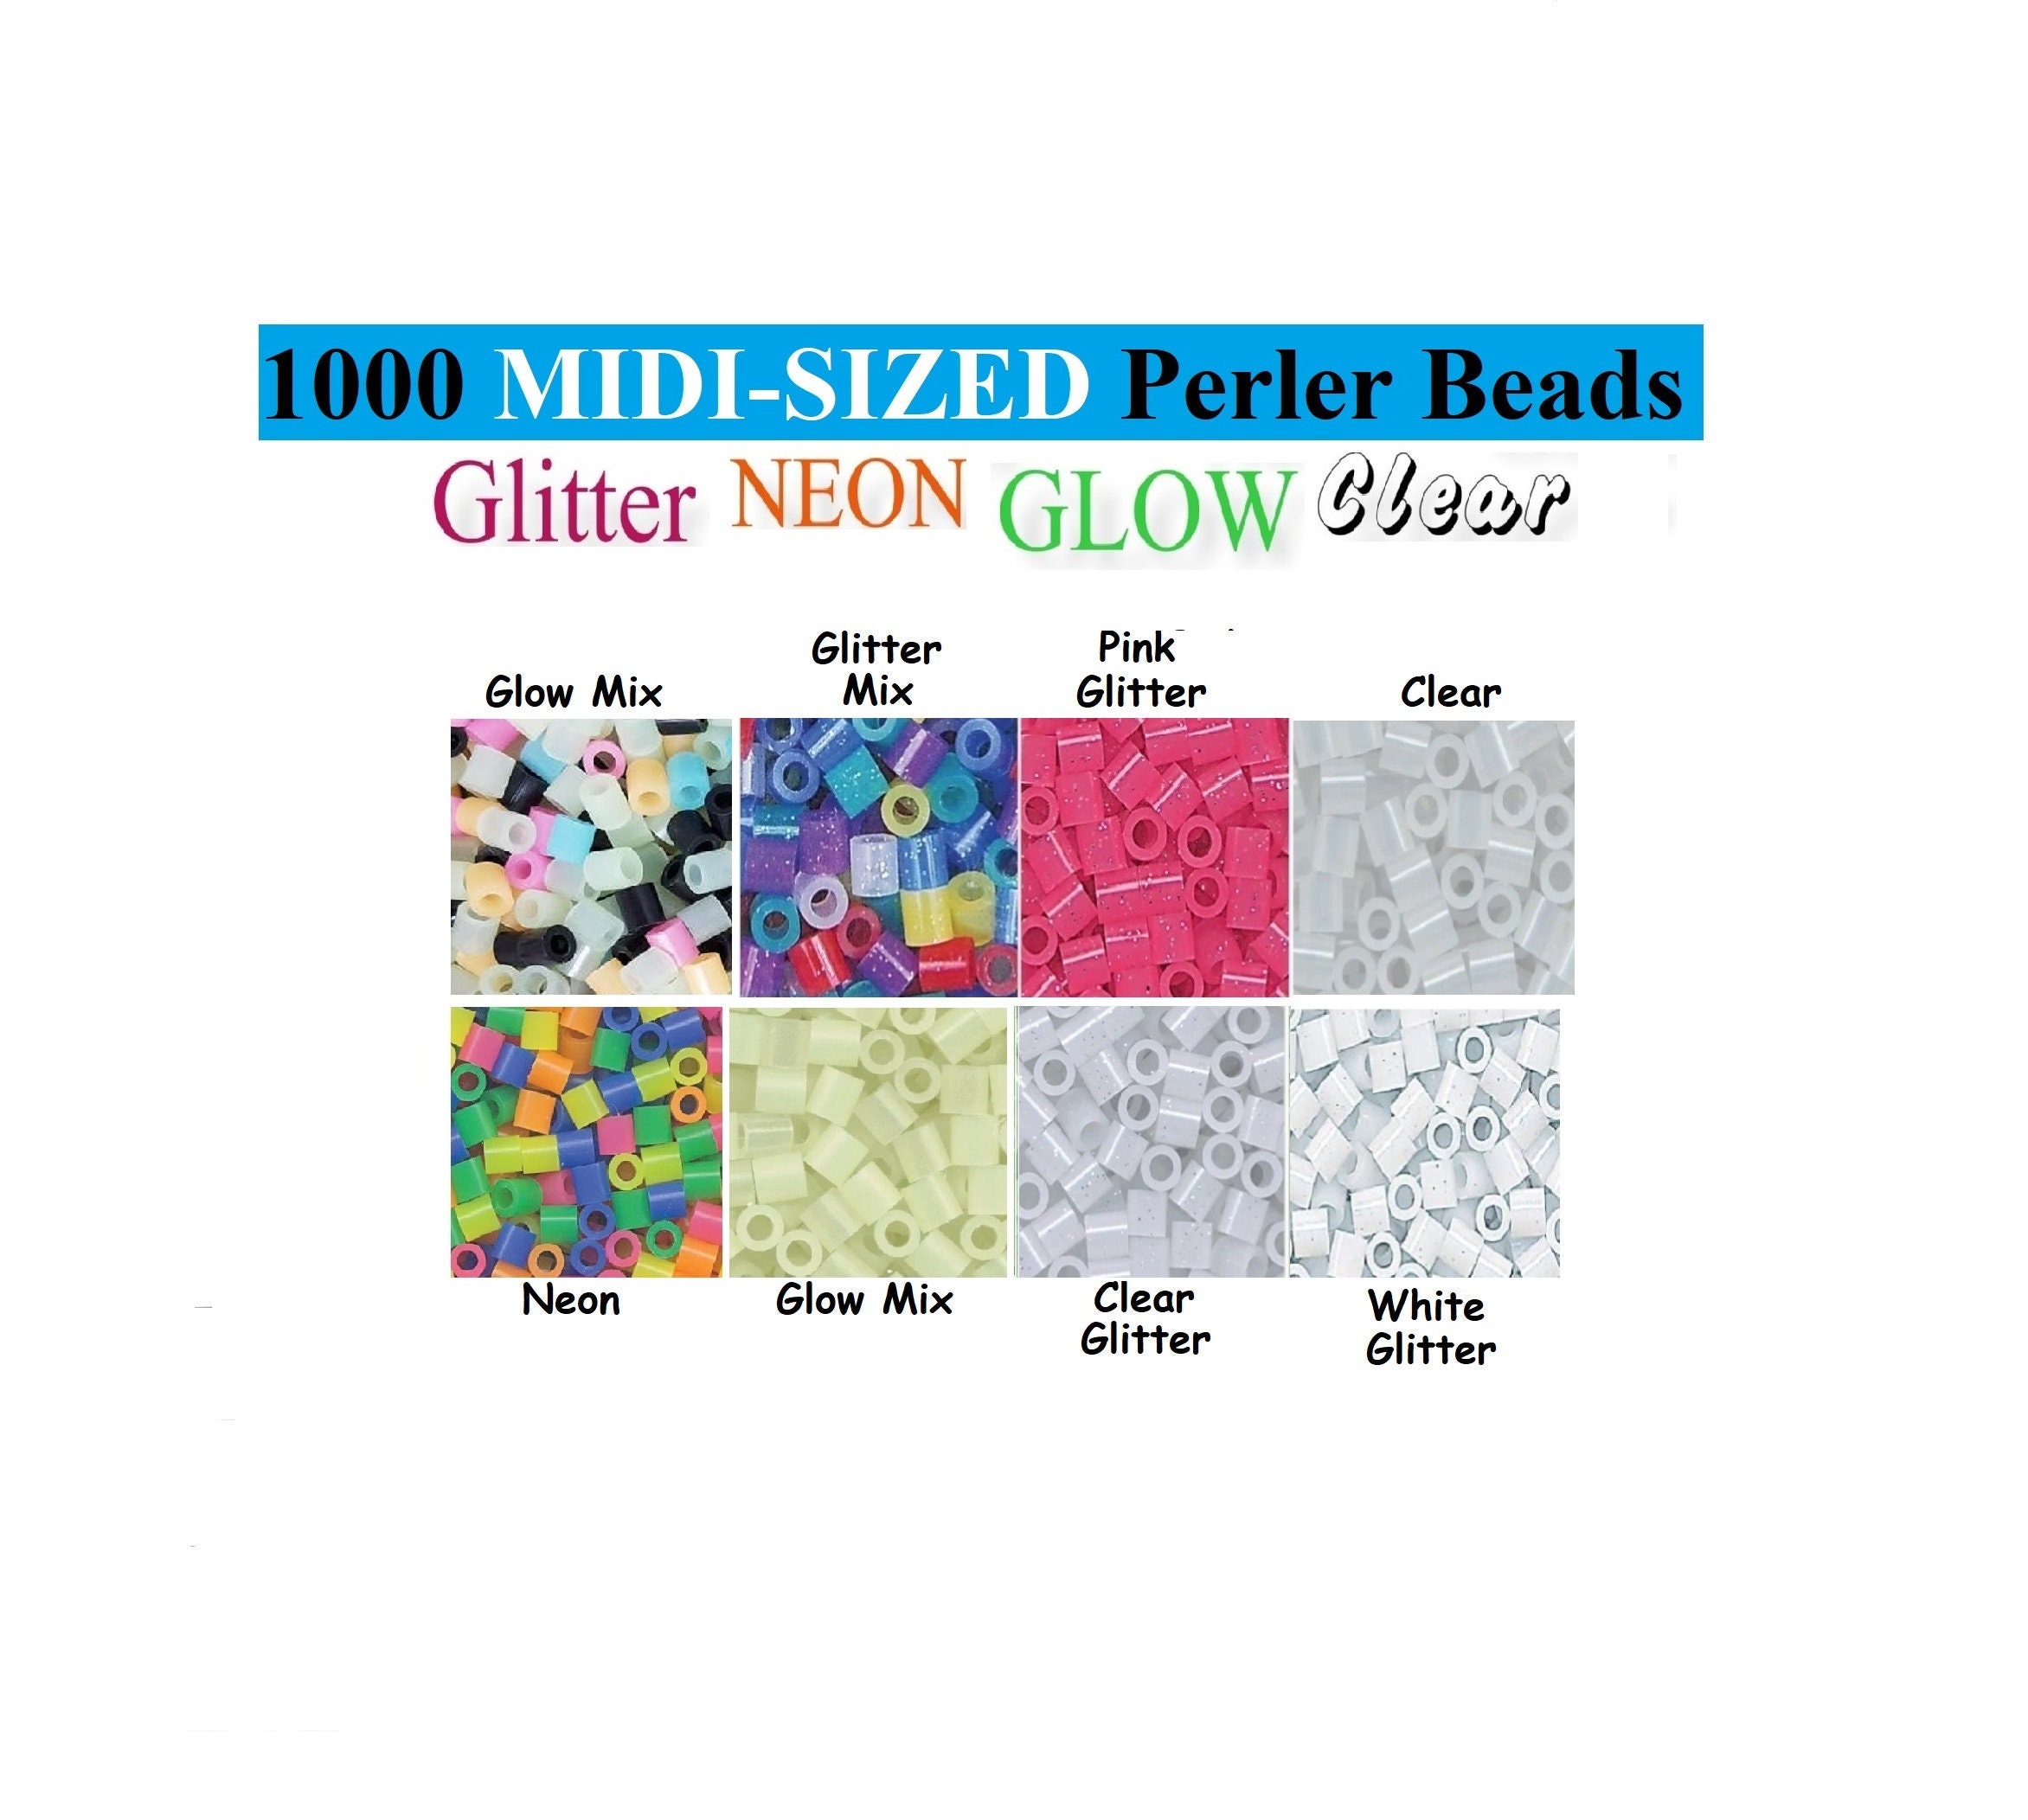 Glow-in-the-dark Fuse Beads for Perlers 8 Colorful Options perler